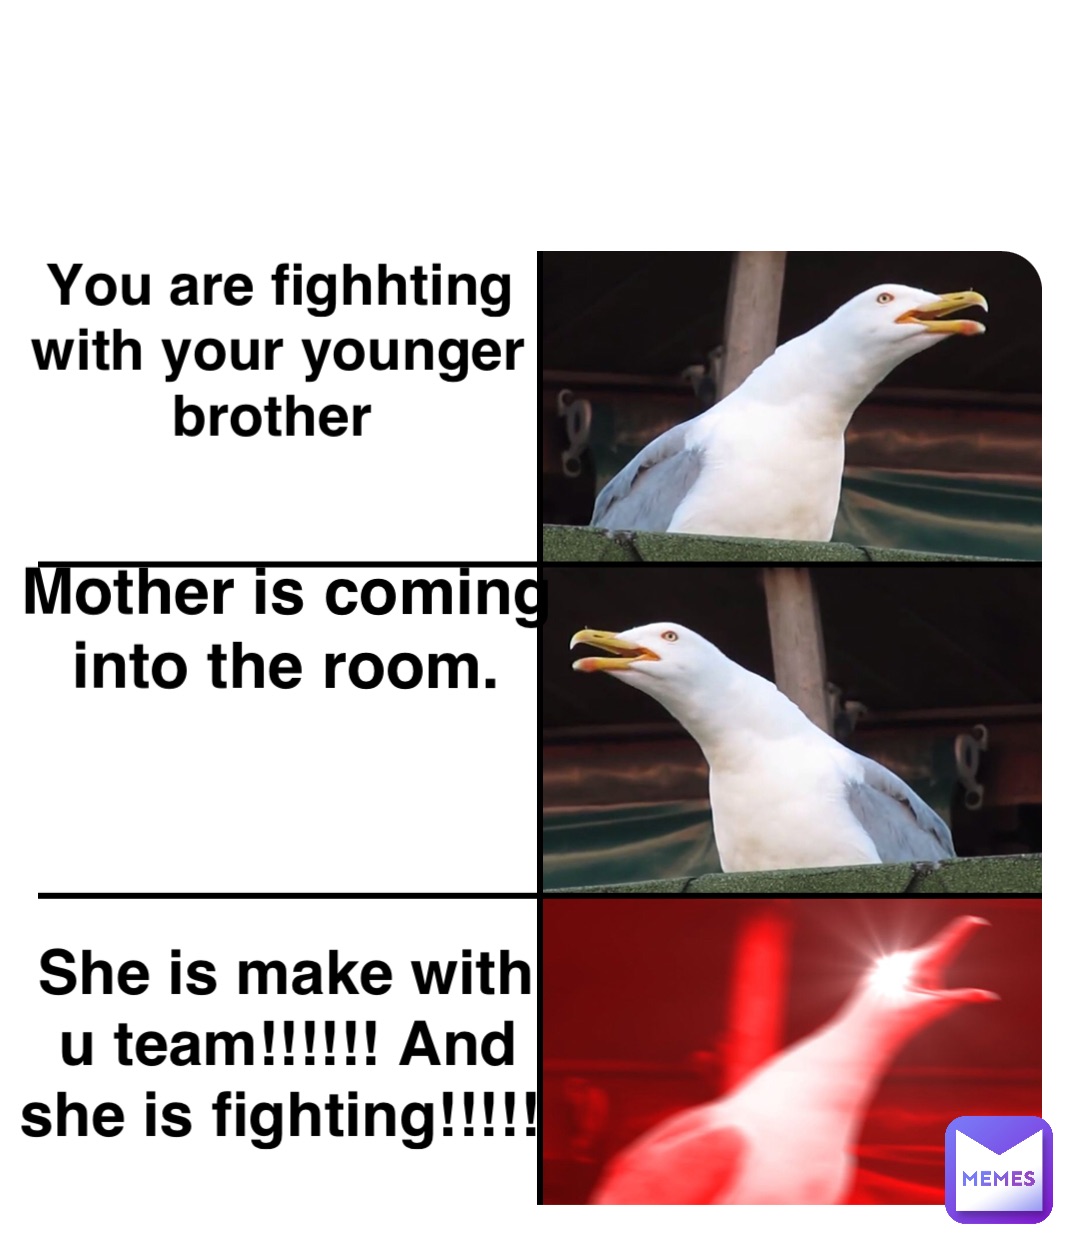 Double tap to edit You are fighhting with your younger brother Mother is coming into the room. She is make with u team!!!!!! And she is fighting!!!!!